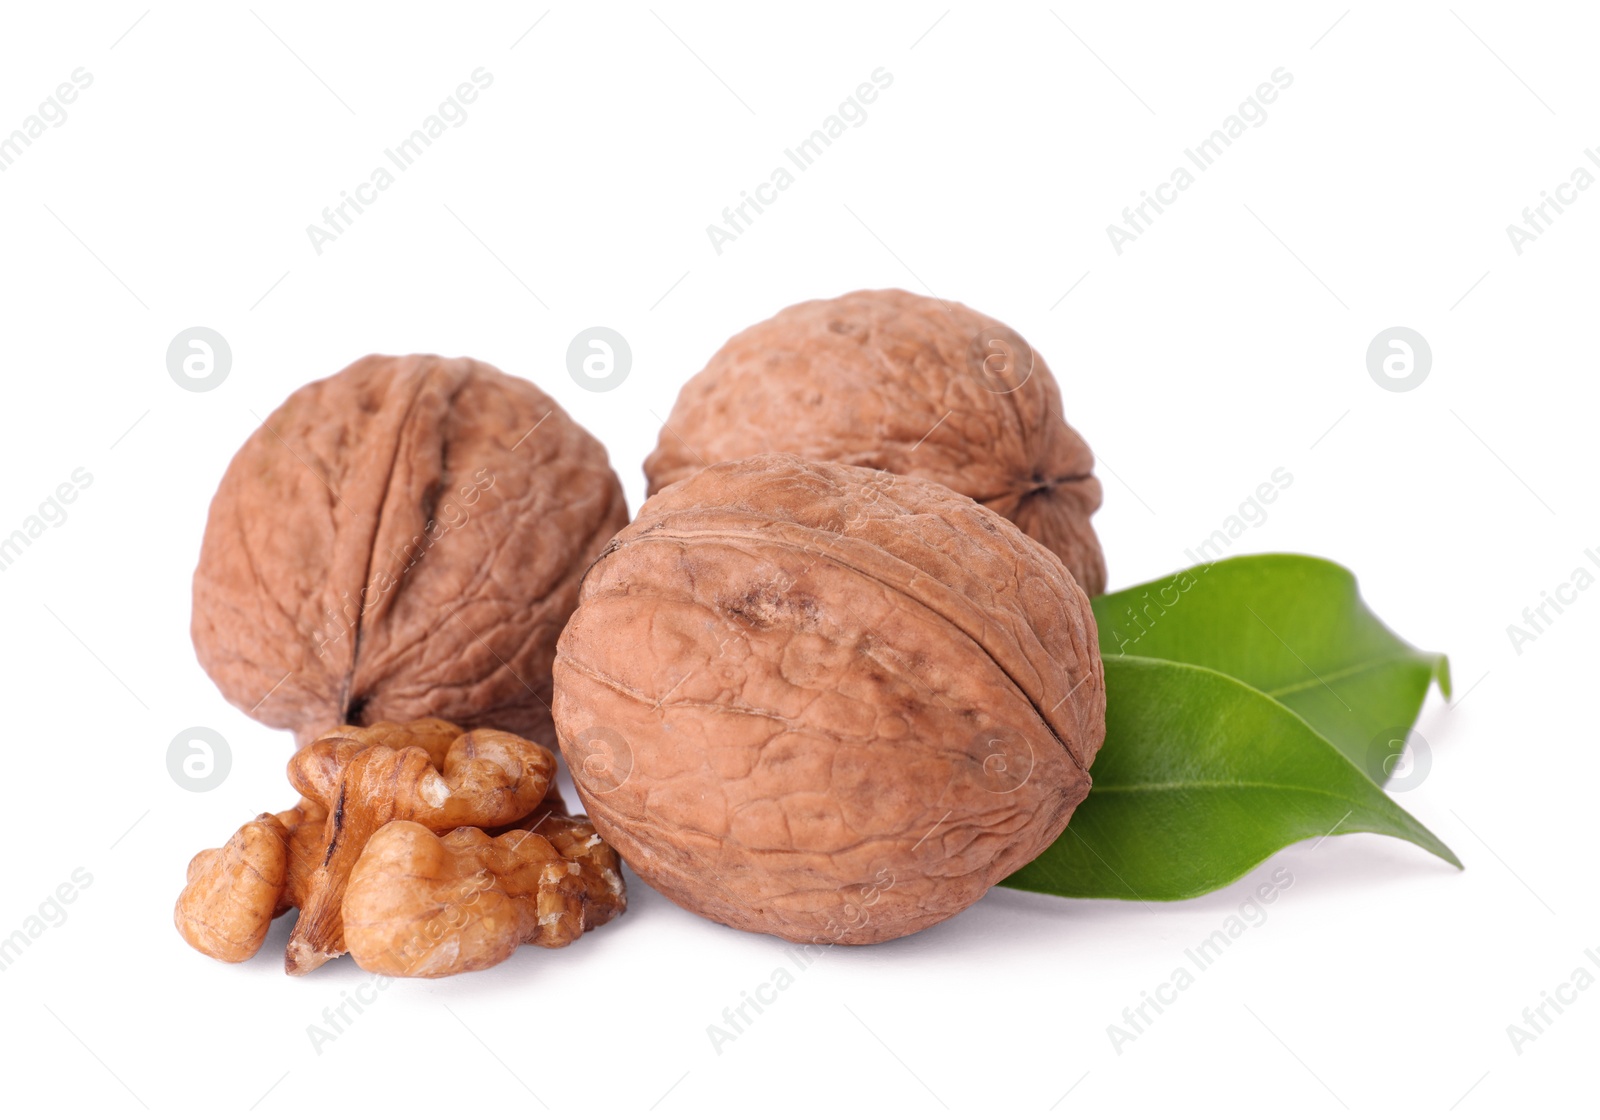 Photo of Walnuts in shell, kernel and green leaves on white background